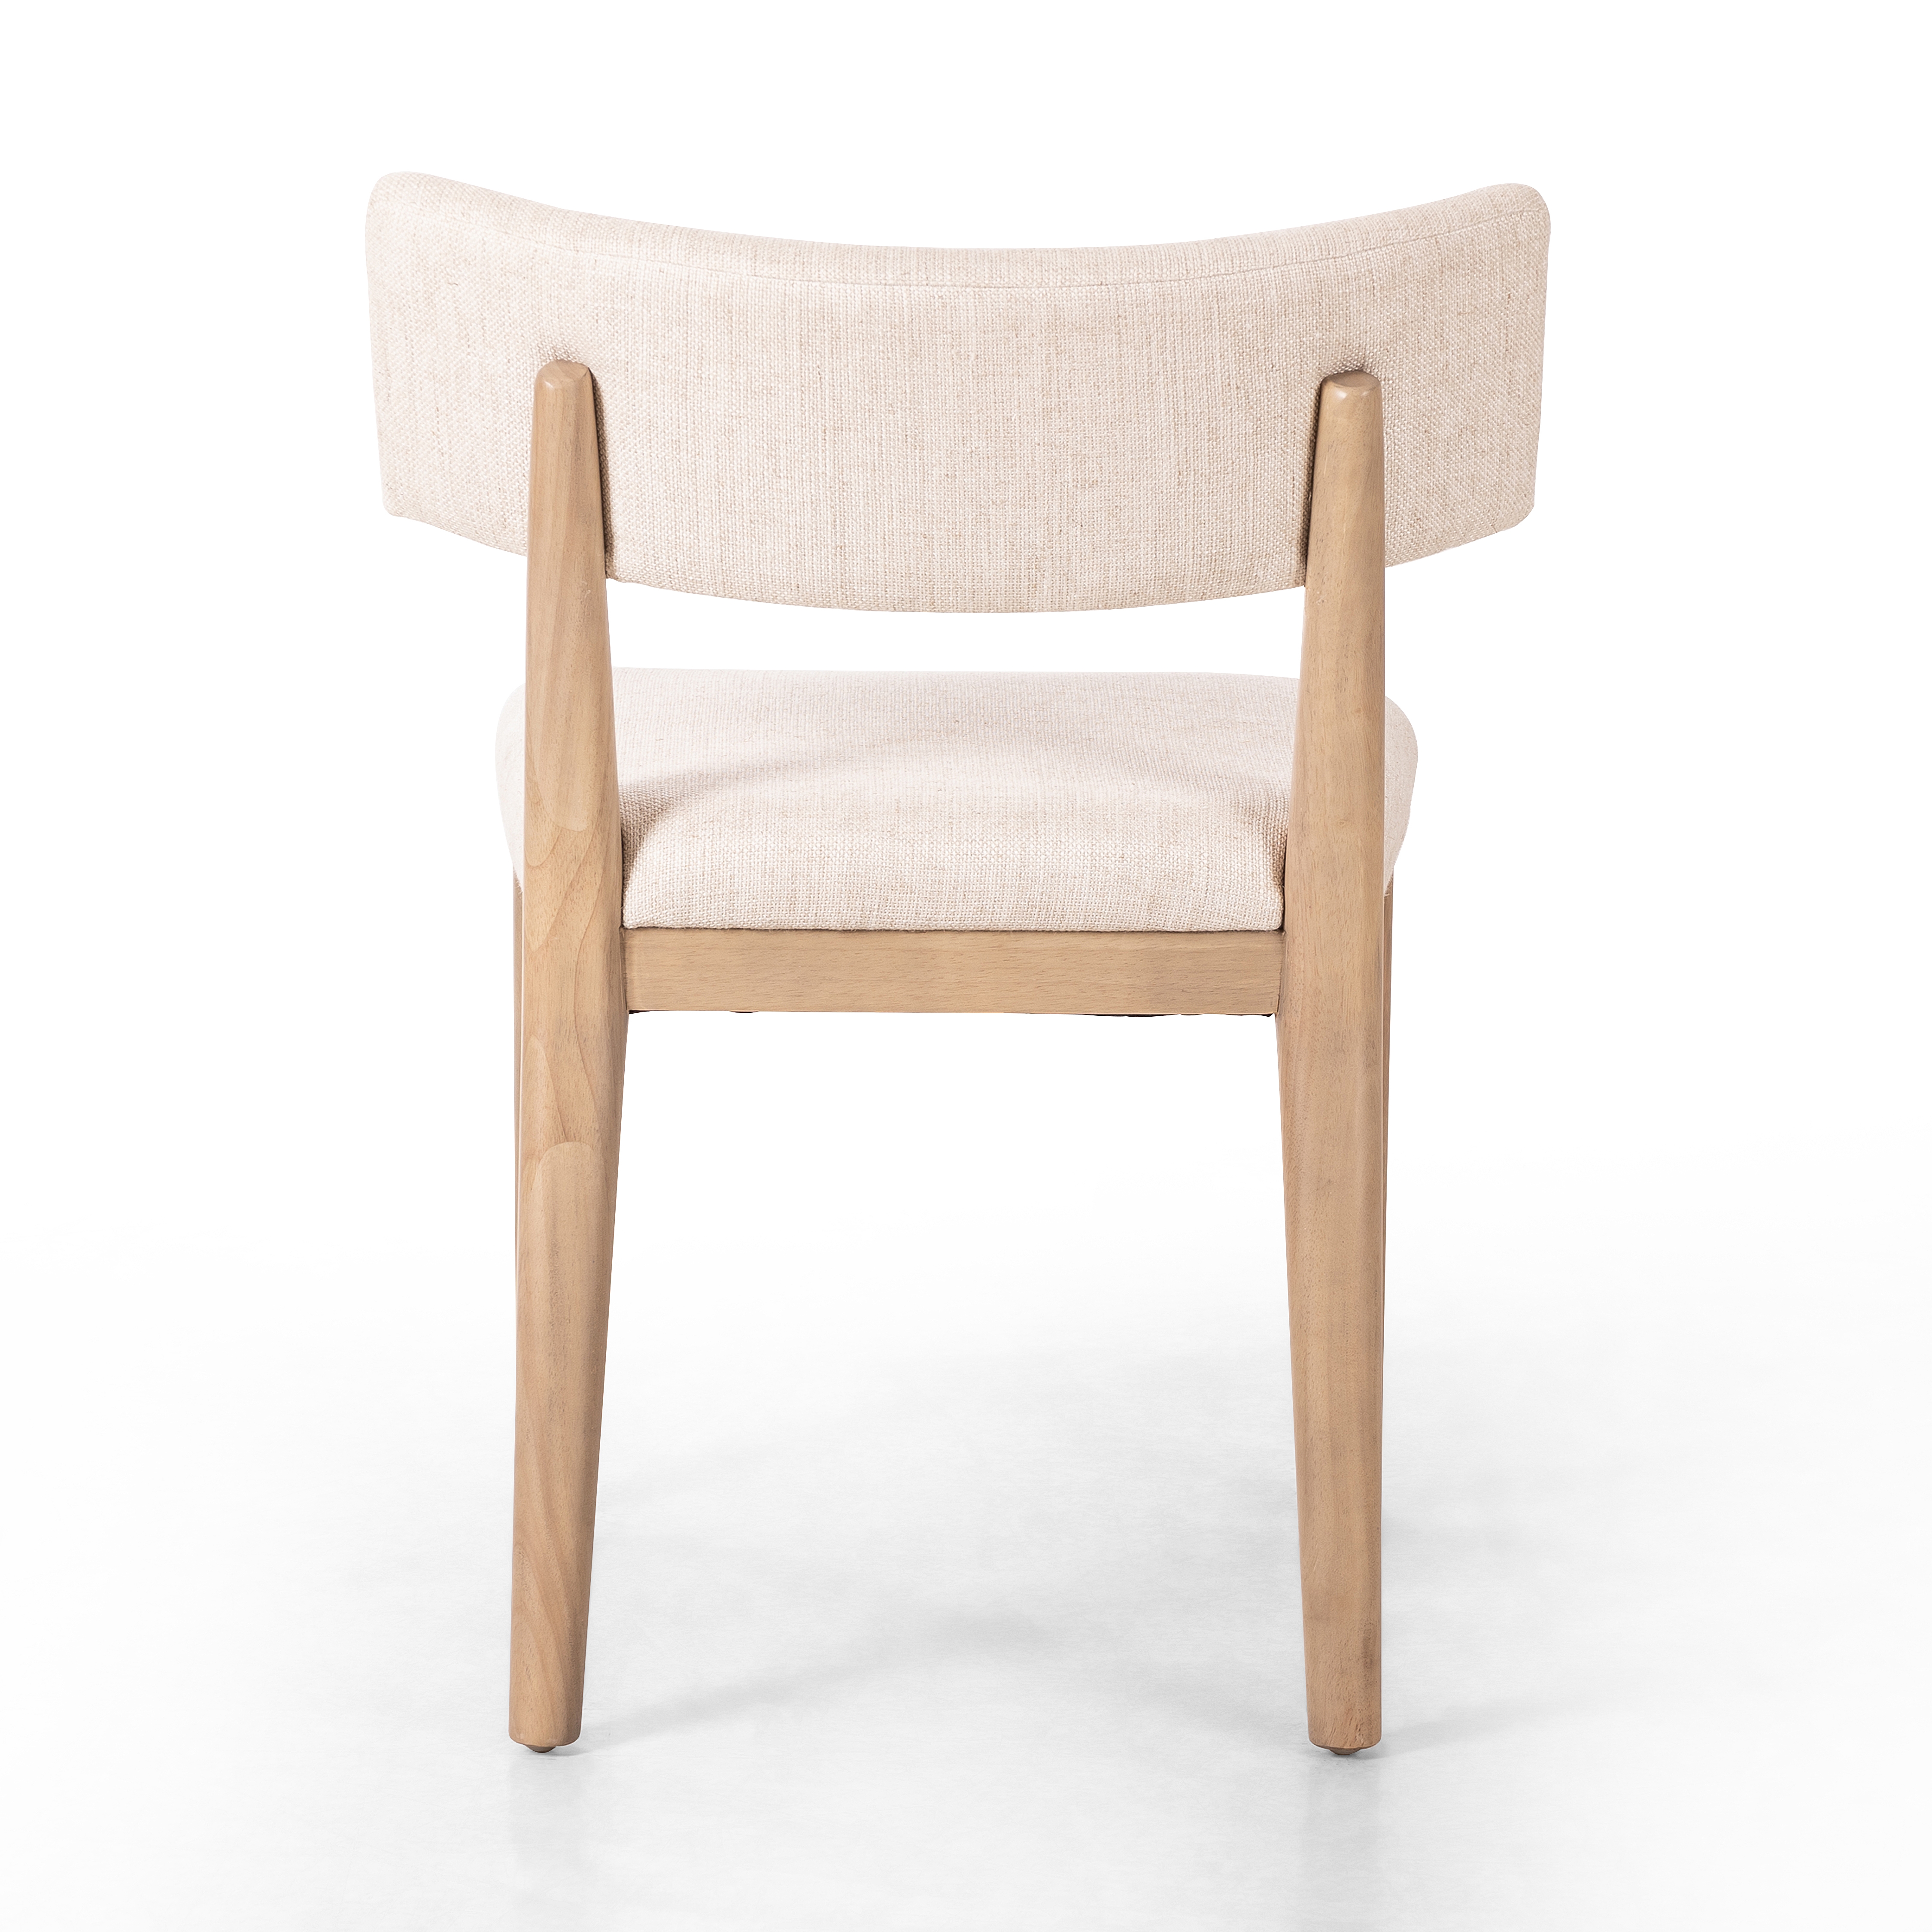 Cardell Dining Chair-Essence Natural - Image 6